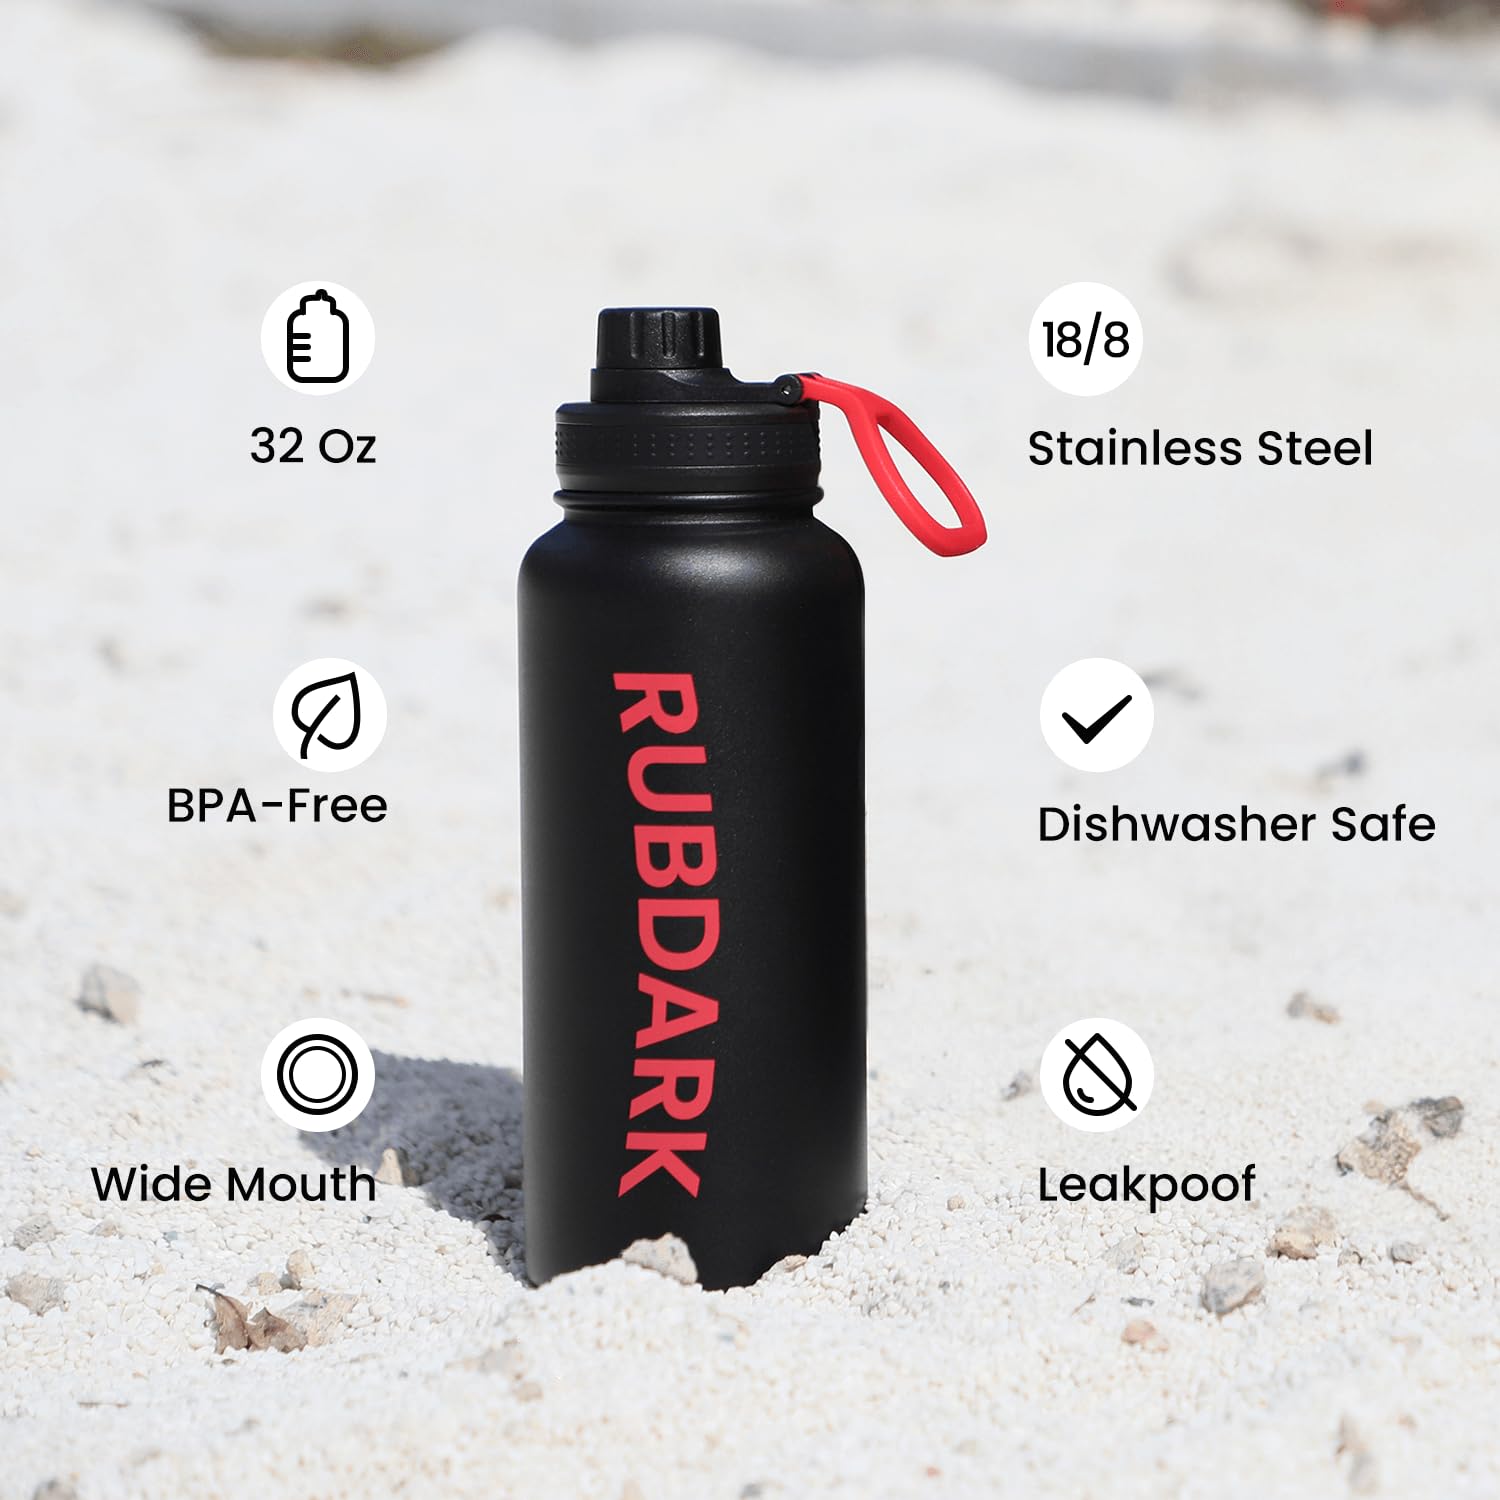 RUBDARK Insulated Water Bottles, 32 Oz Wide Mouth Double Vacuum Stainless Steel Water Flask,Leakproof Thermos Metal Water Bottle,Reusable for School,Travel, Camping, Bike, Sports (Gift box)